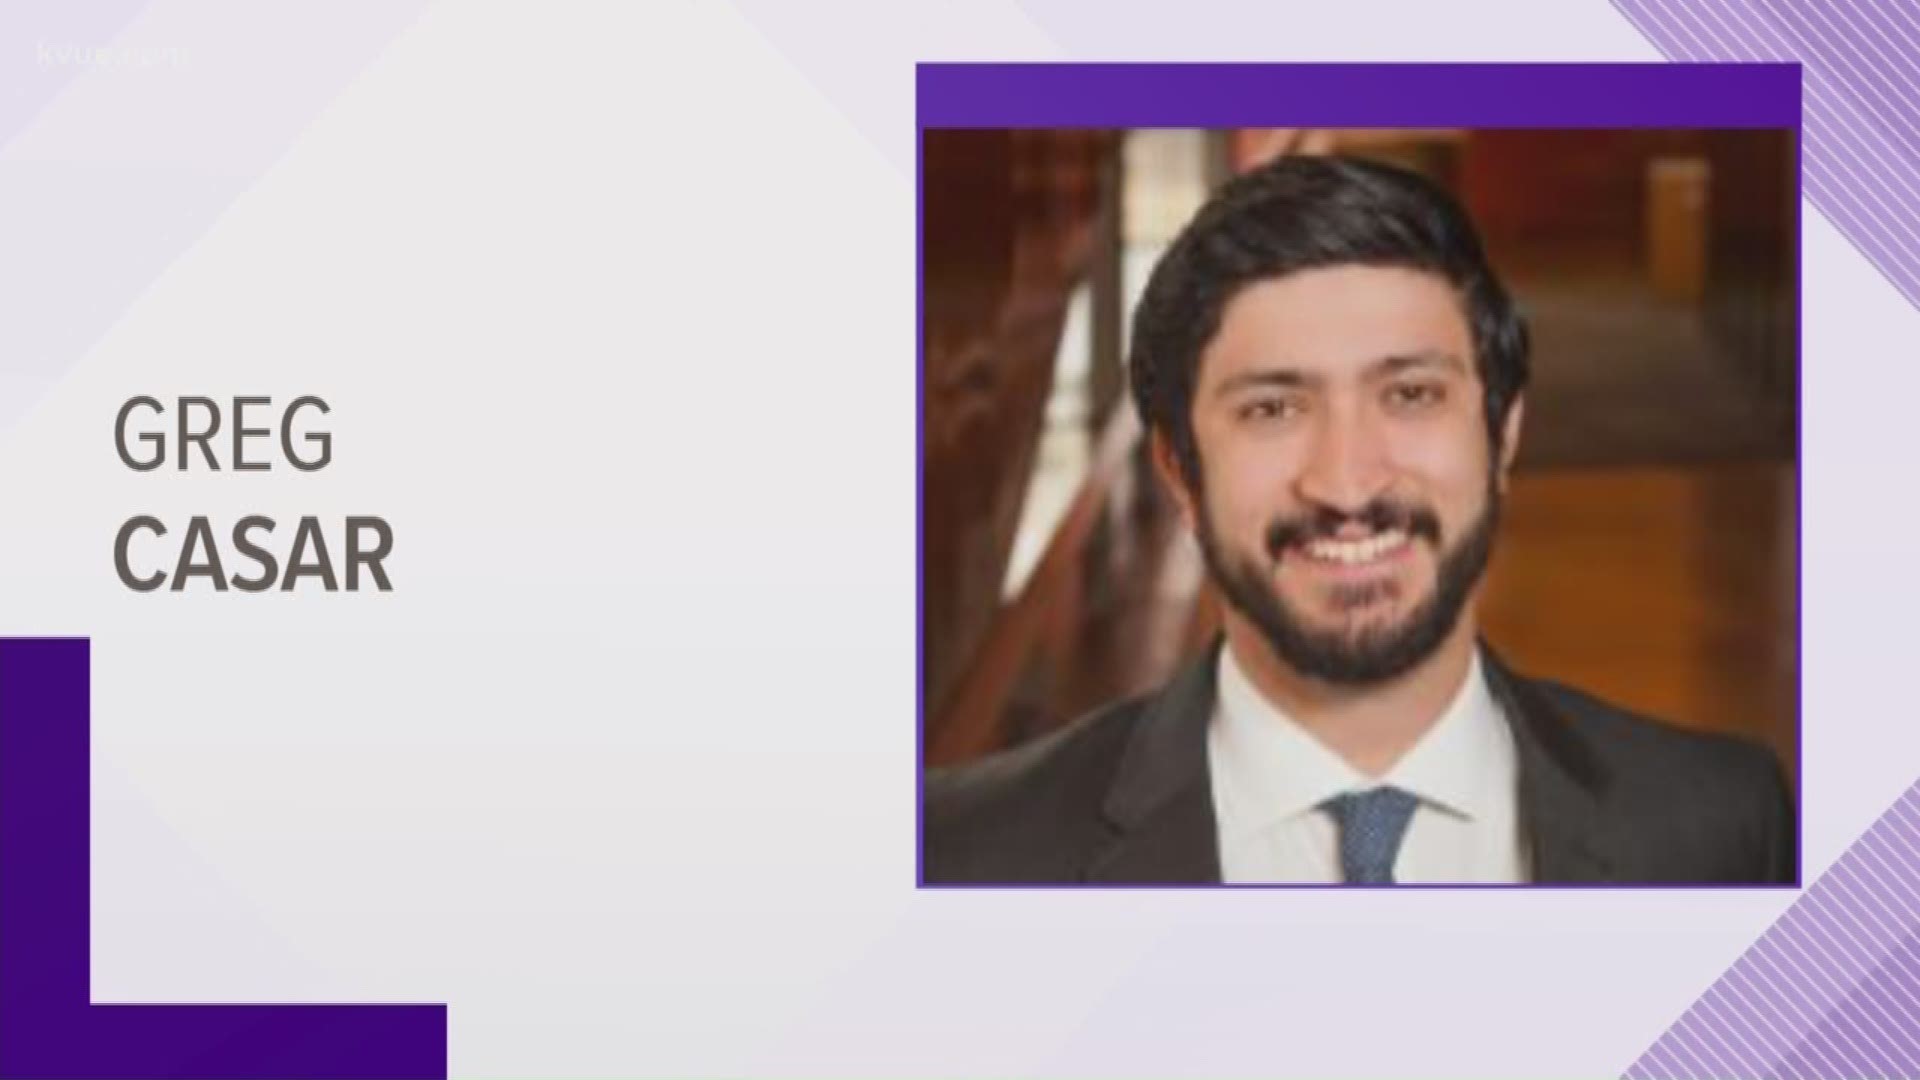 Austin City Council member Greg Casar filed a treasurer's report for the District 14 seat.